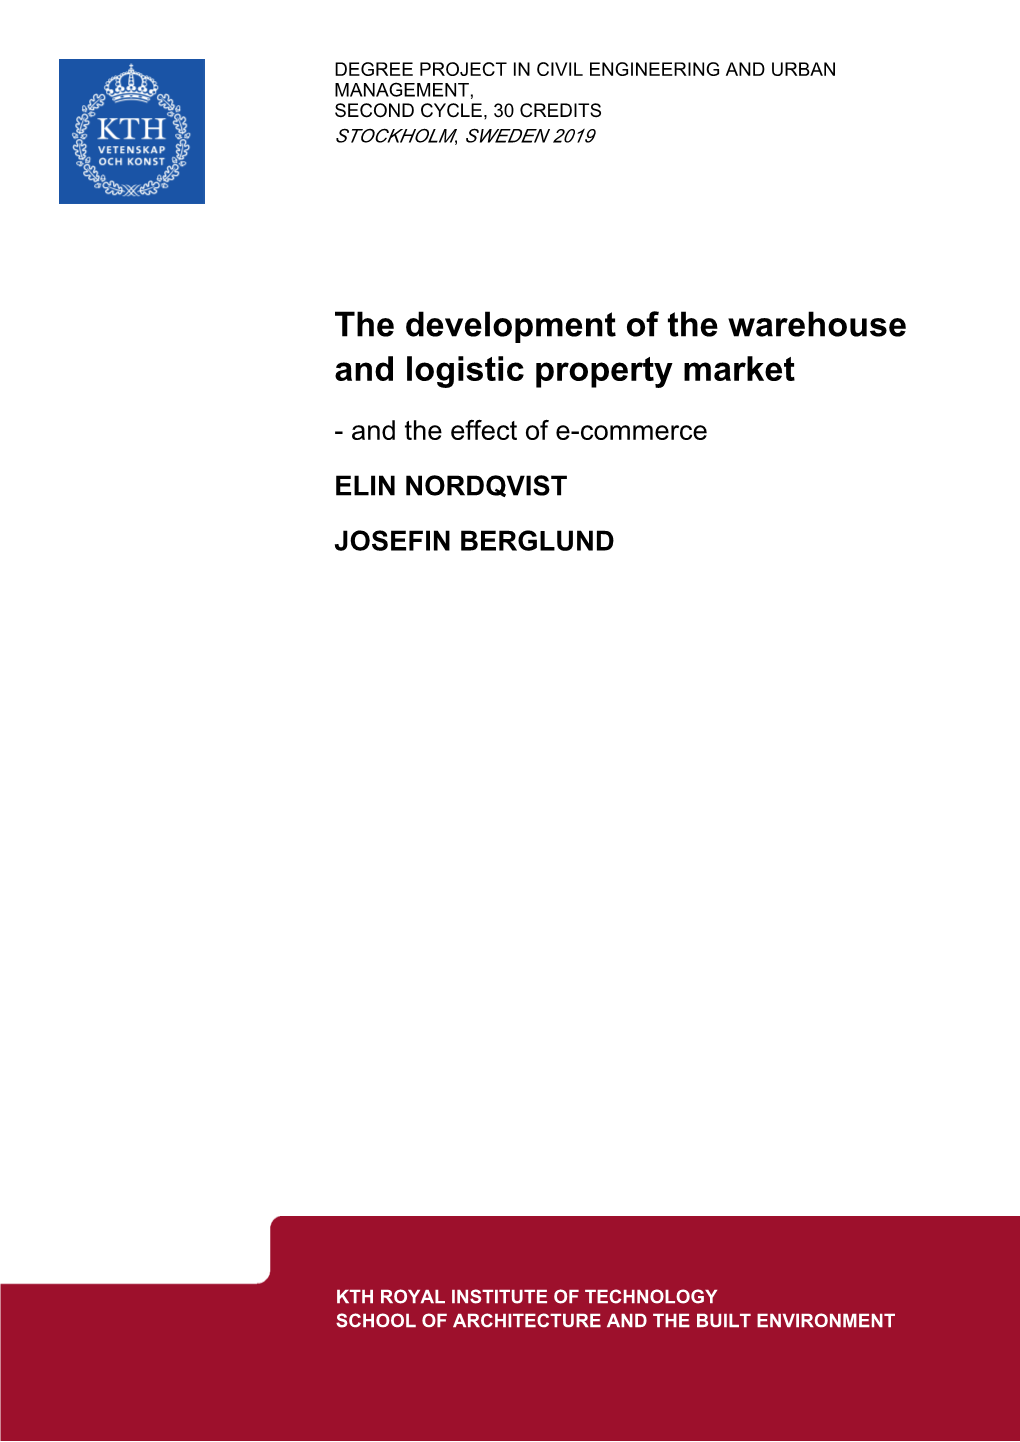 The Development of the Warehouse and Logistic Property Market